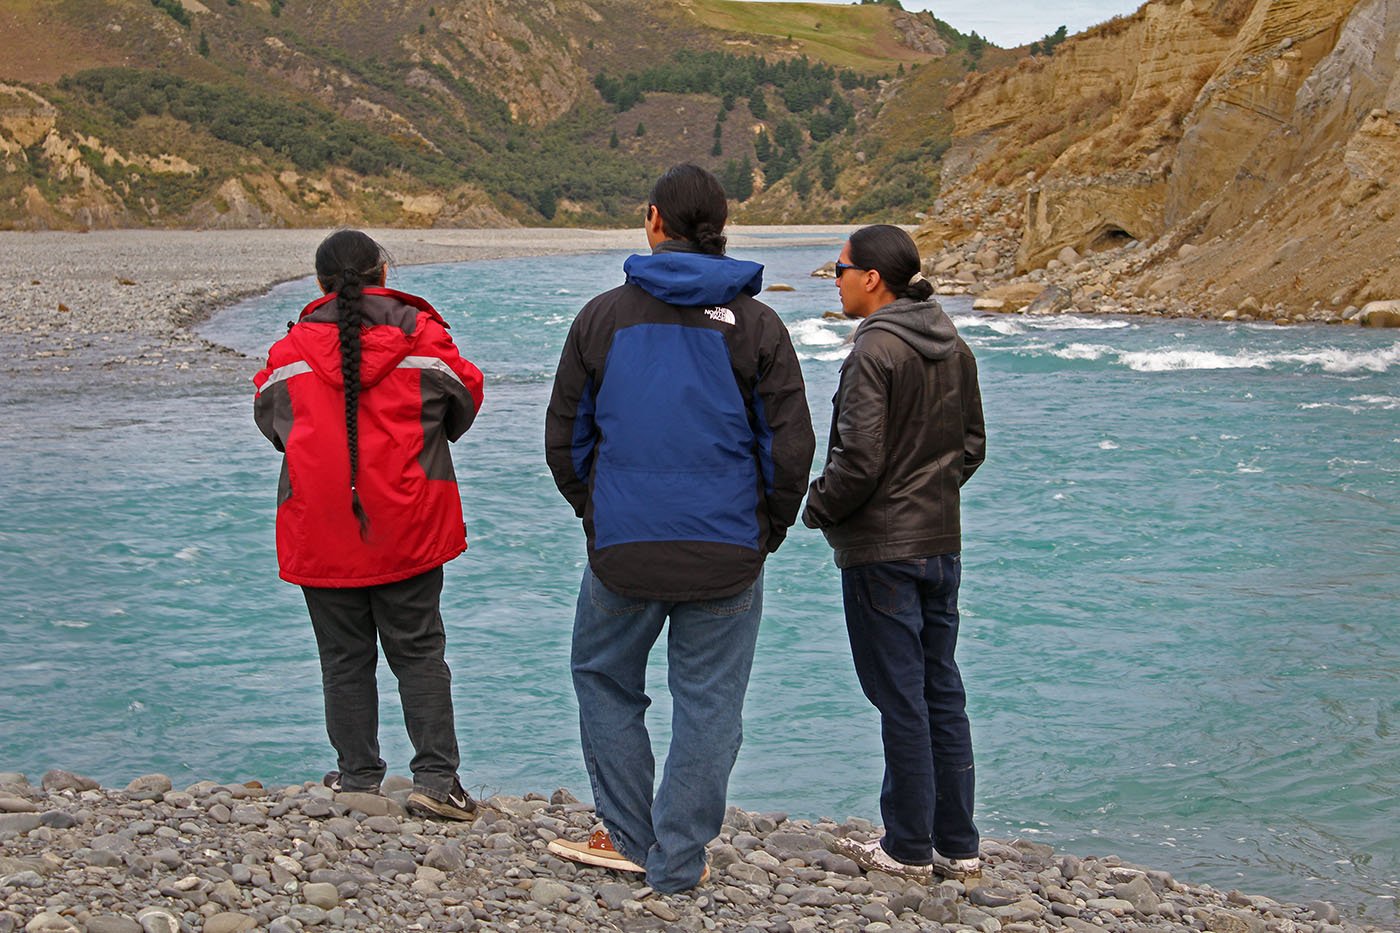  Chief Caleen Sisk, Michael Preston and Nick Wilson look out onto the Rakaia River. The Winnemem Wintu danced for the salmon there. 2010. Photo: Courtesy of Dirk Barr 